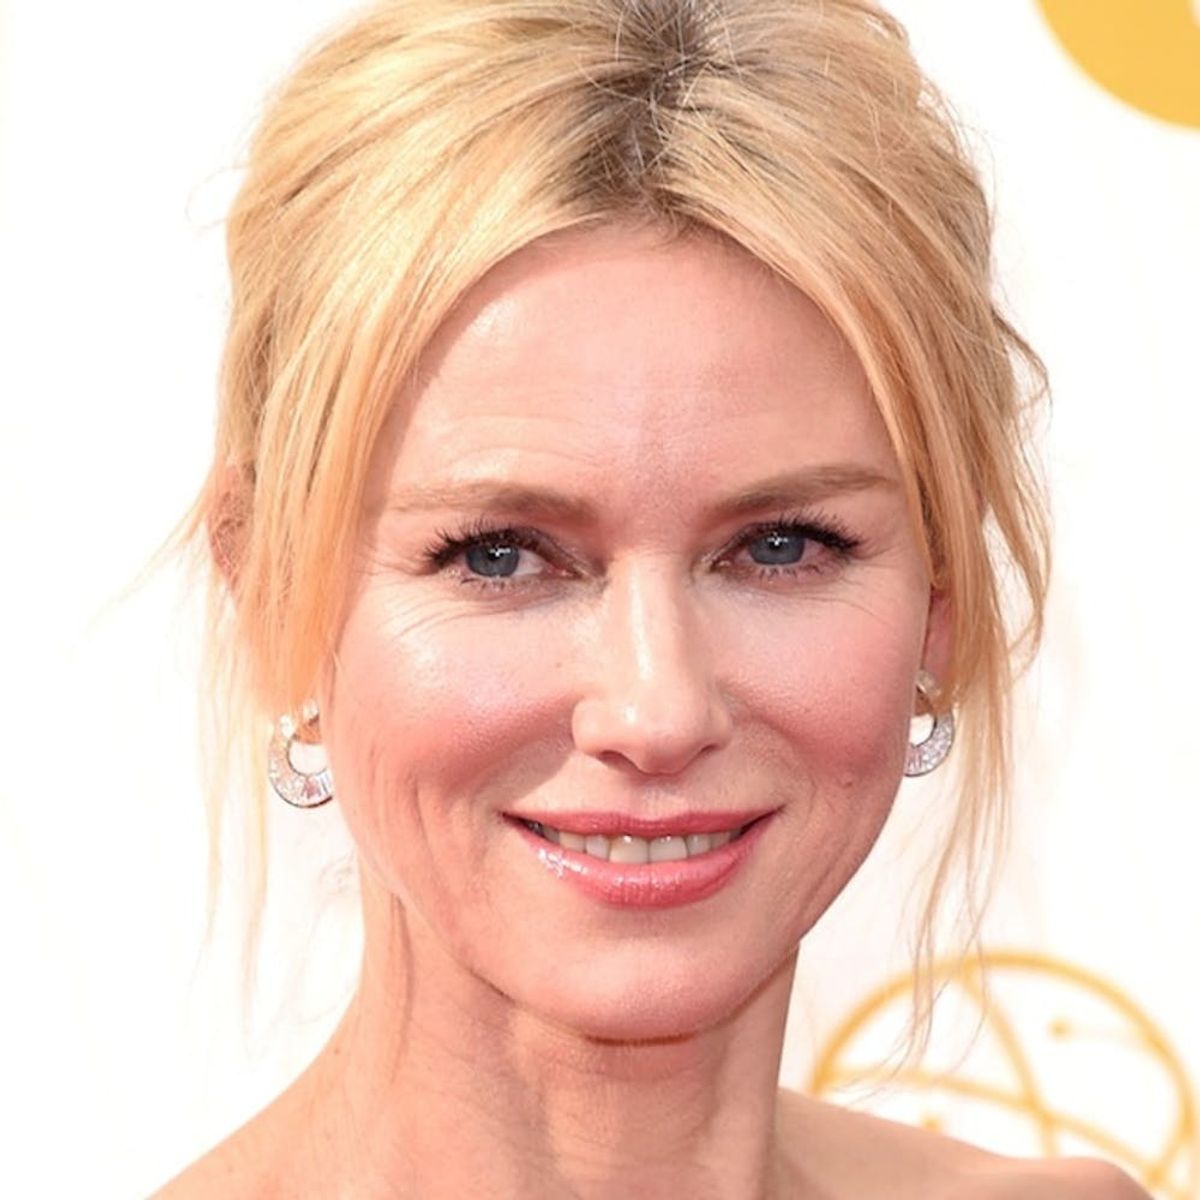 Get the Look of Naomi Watts’s Modern-Chic French Chateau